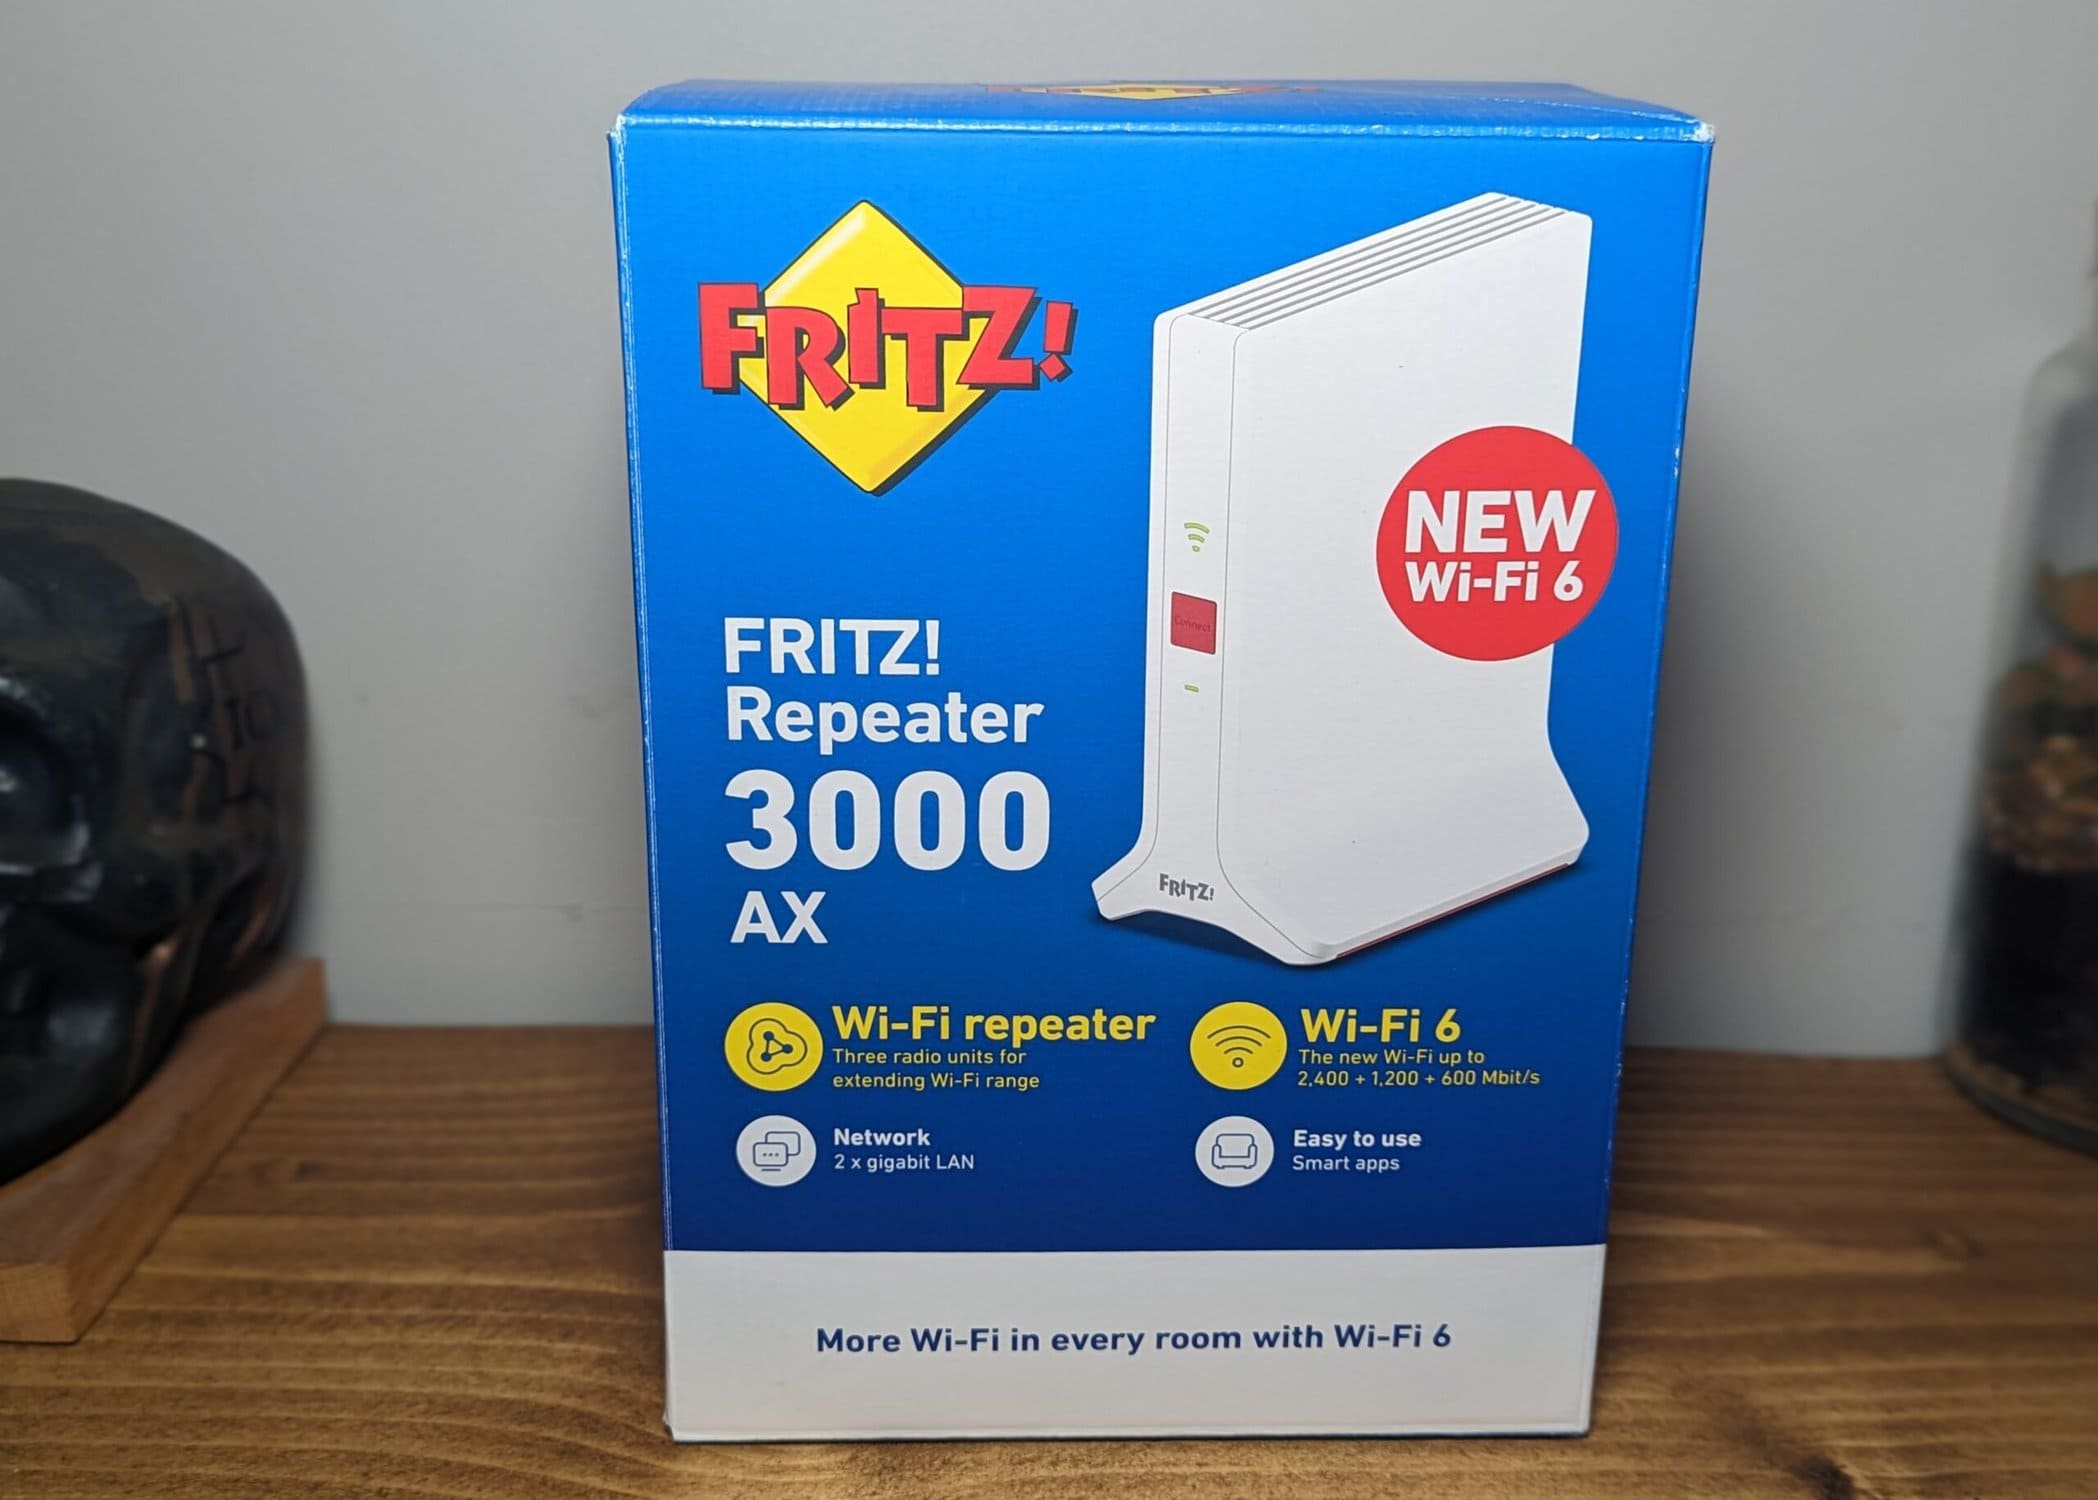 FRITZ!Repeater 3000 AX Review vs FRITZ!Repeater 6000 Tri-Band Mesh WiFi Repeaters